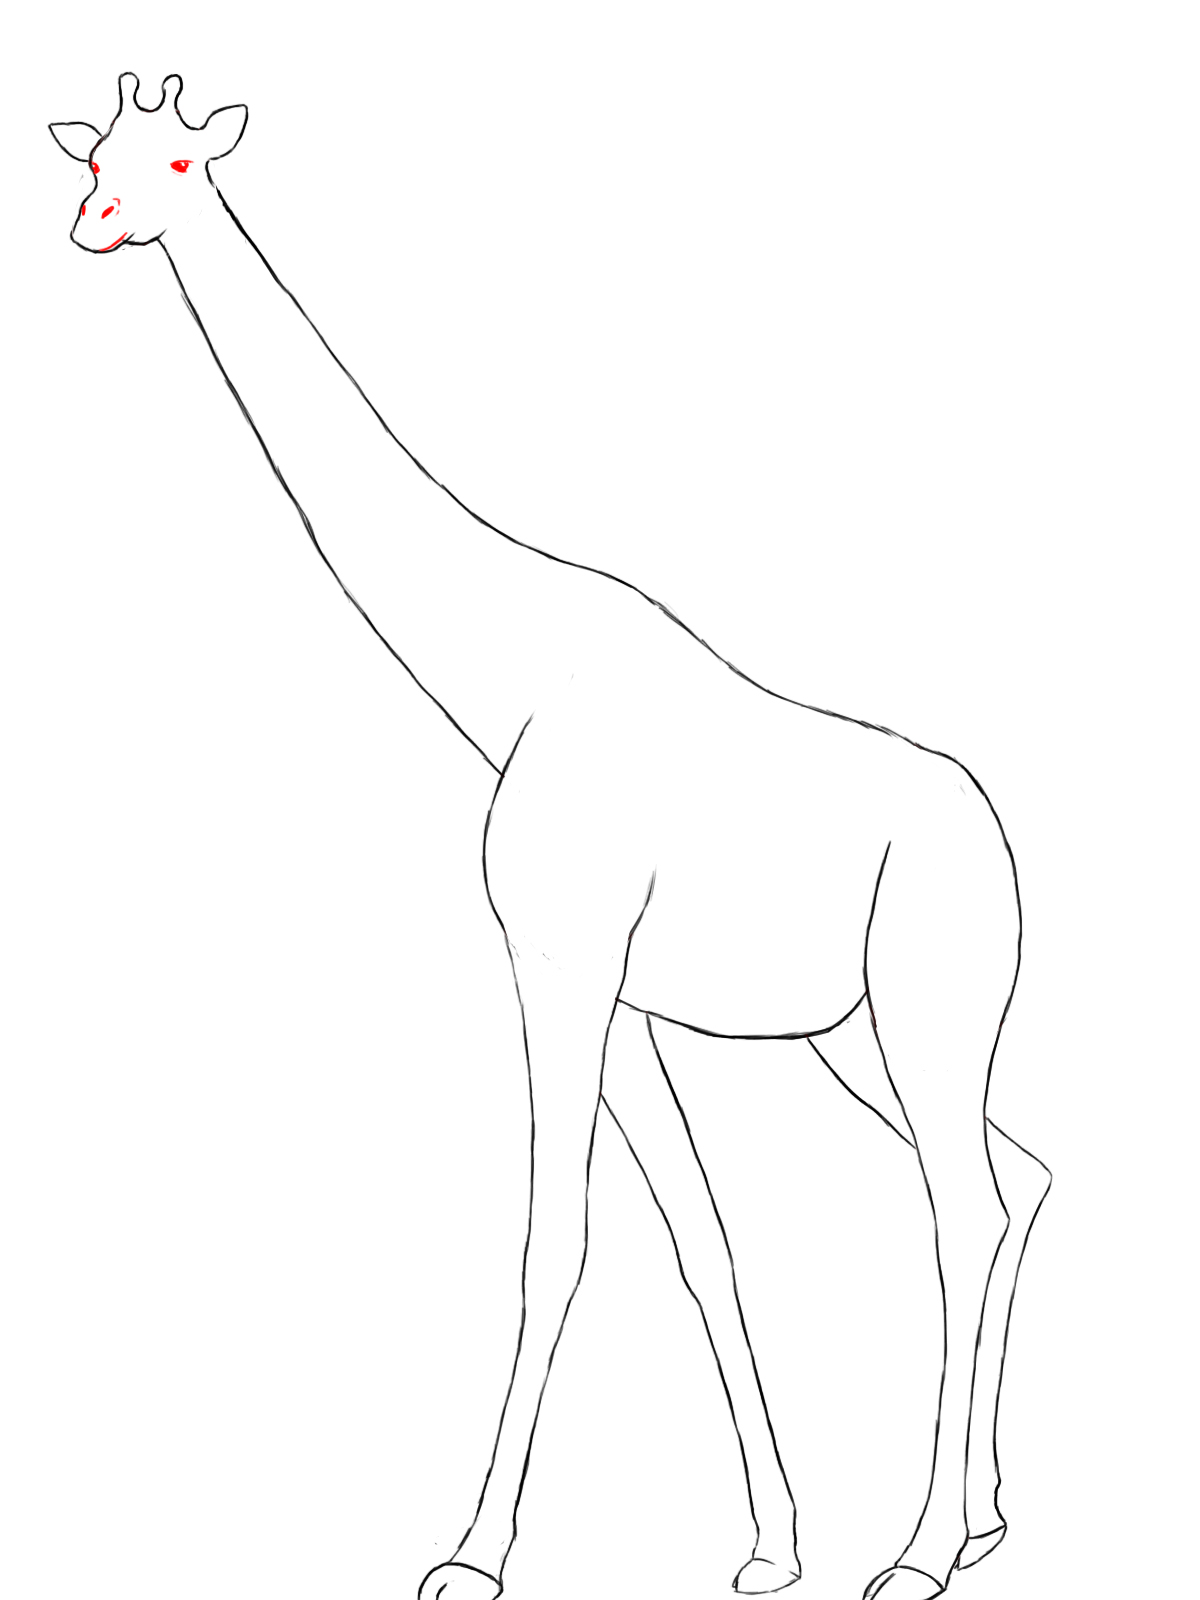 How To Draw A Giraffe - Draw Central